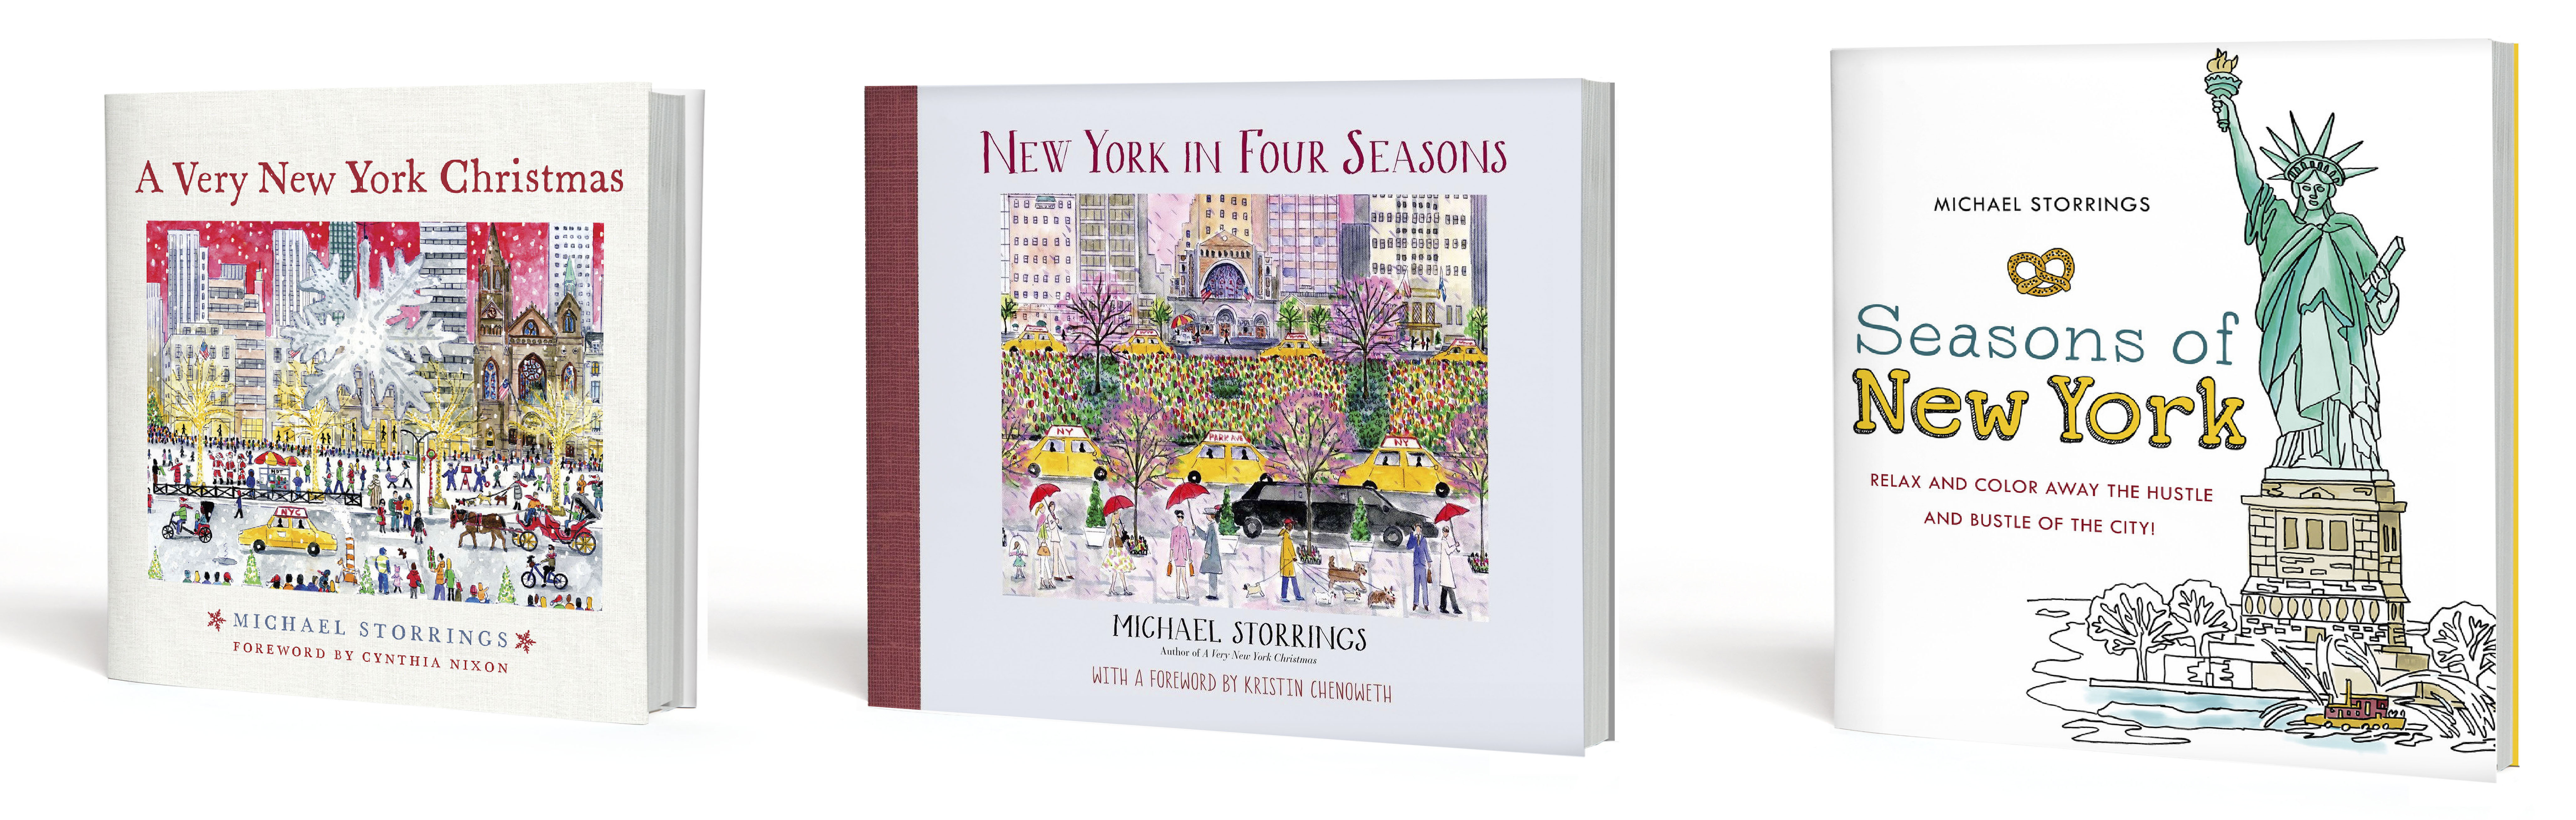 A Very New York Christmas, New York in Four Seasons, and the Seasons of New York Coloring Book.